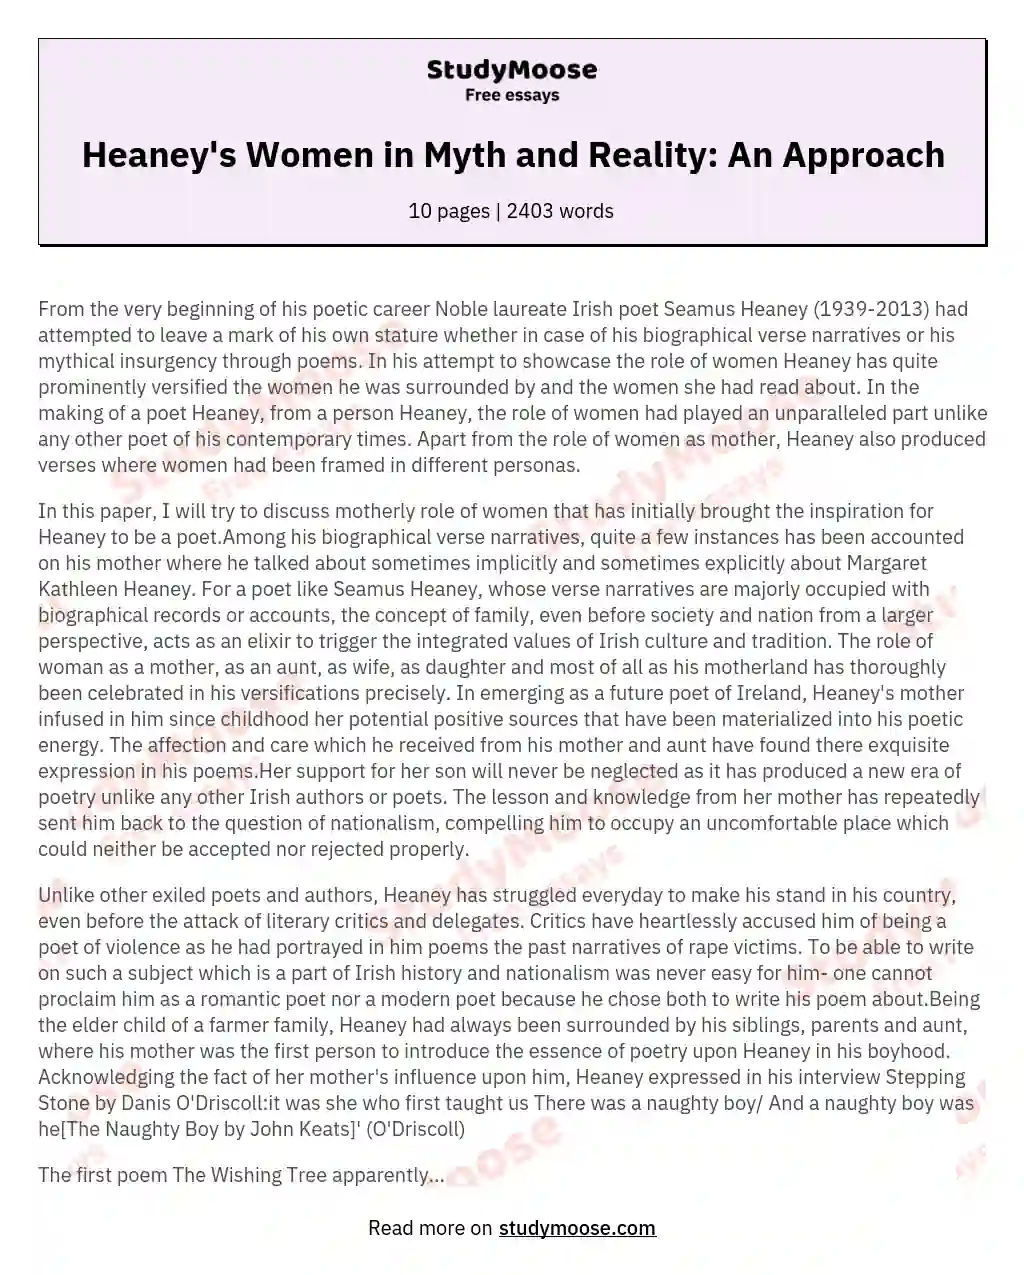 Heaney's Women in Myth and Reality: An Approach essay